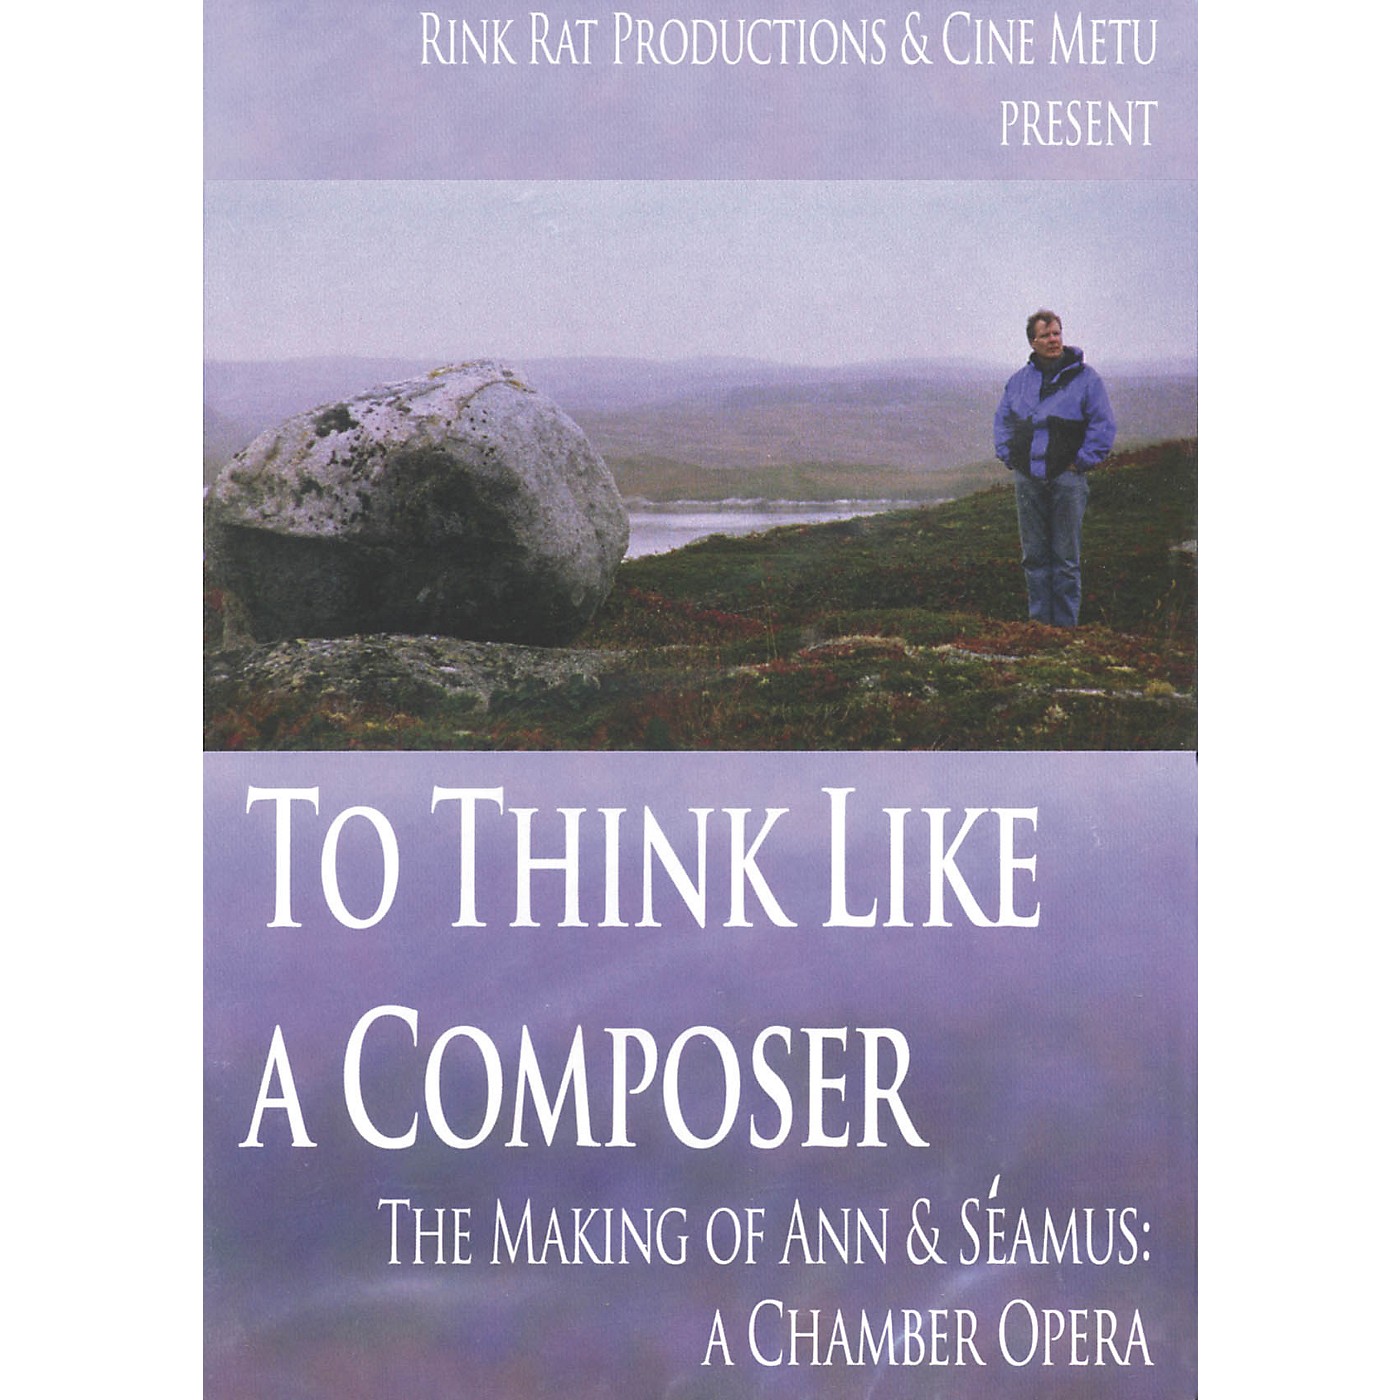 Hal Leonard To Think like a Composer (The Making of Ann & Séamus: A Chamber Opera) thumbnail